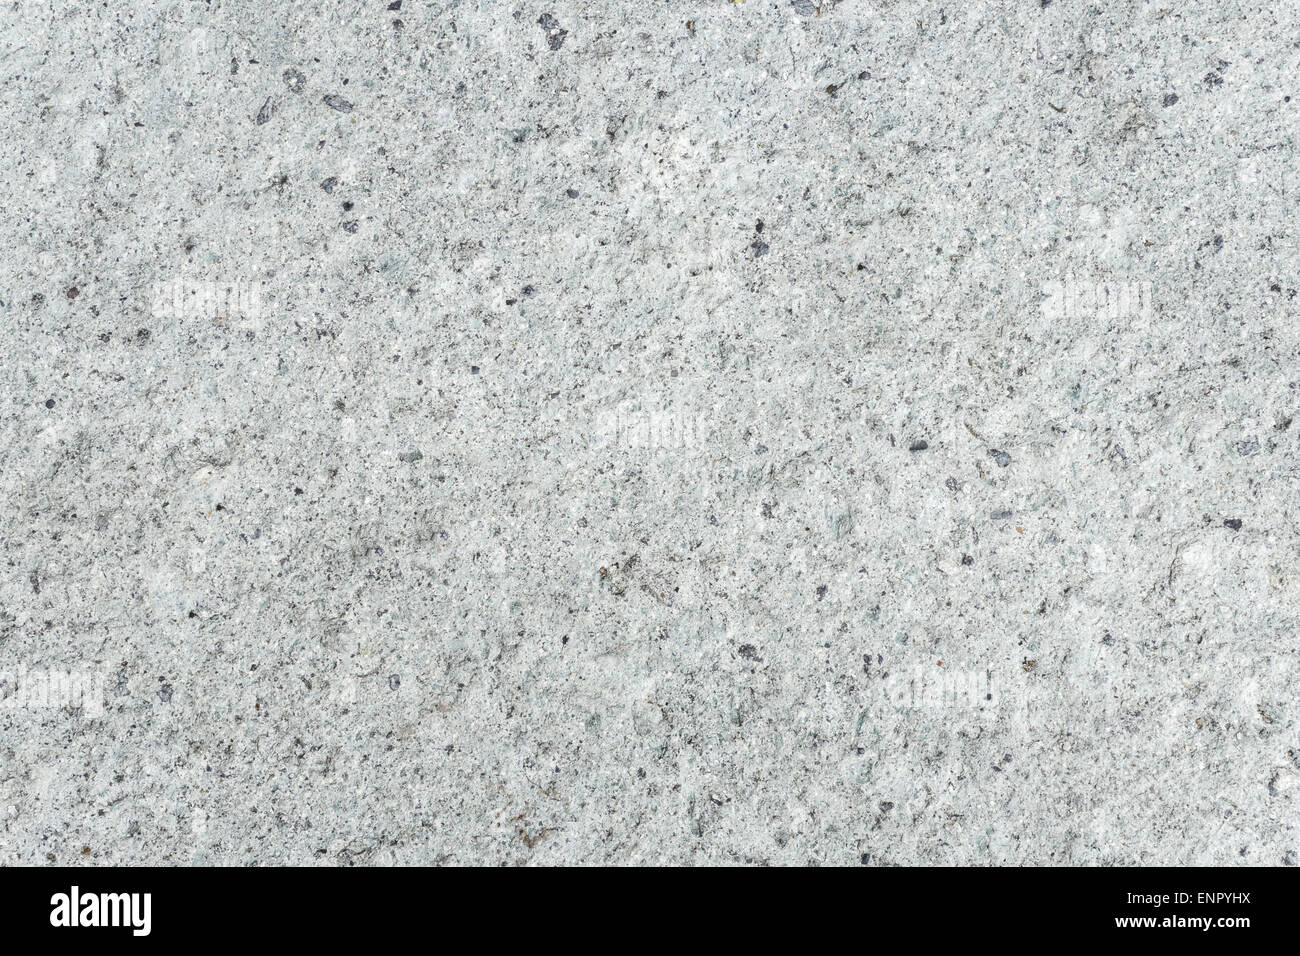 Light Grey Concrete Floor with Small Black Dot Pattern Stock Photo